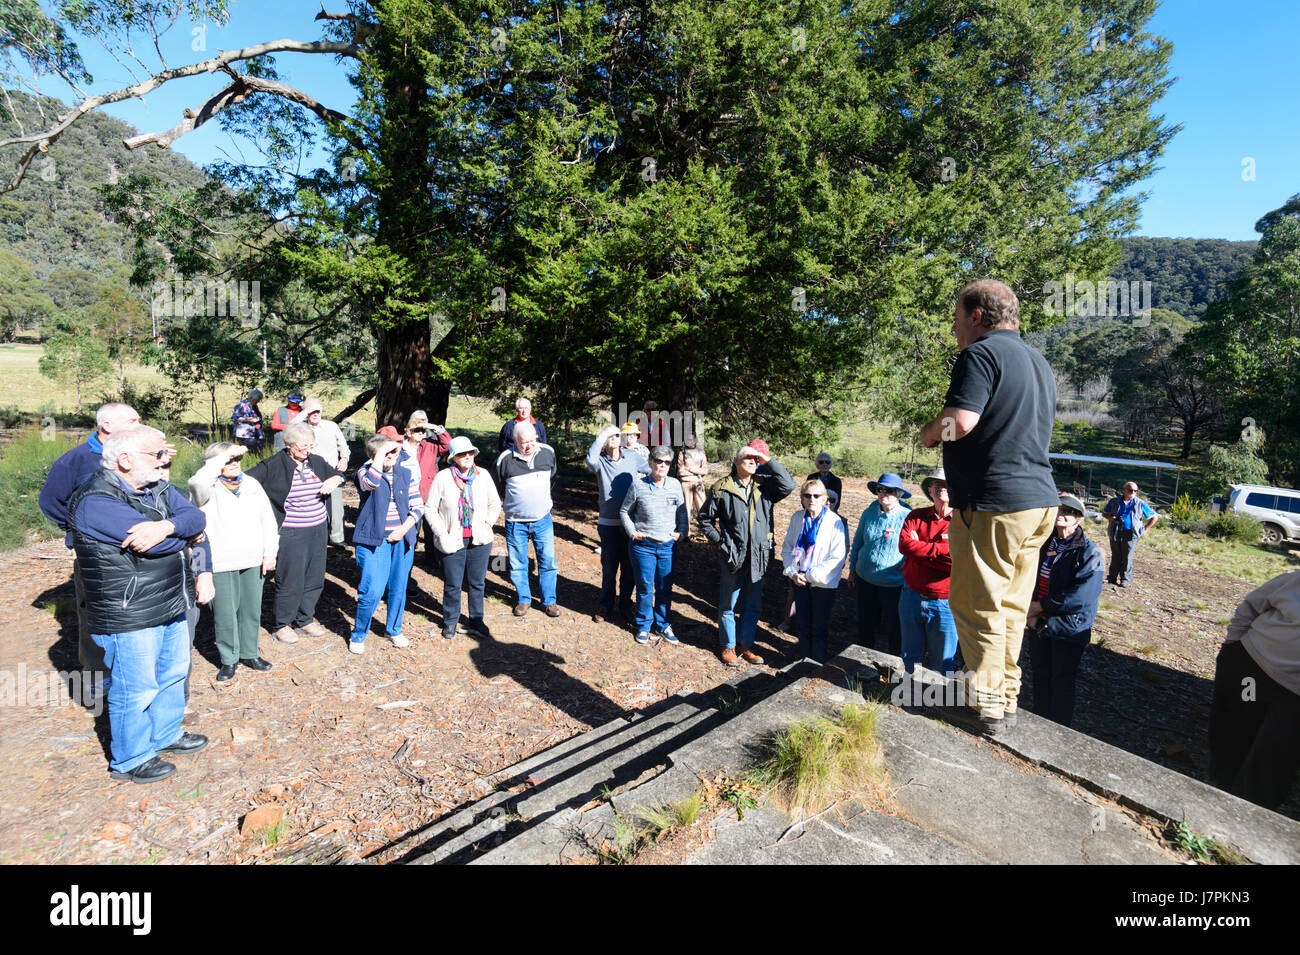 Group of elderly people on a guided tour of the Joadja ghost town and distillery, Joadja, Southern Highlands, New South Wales, NSW, Australia Stock Photo